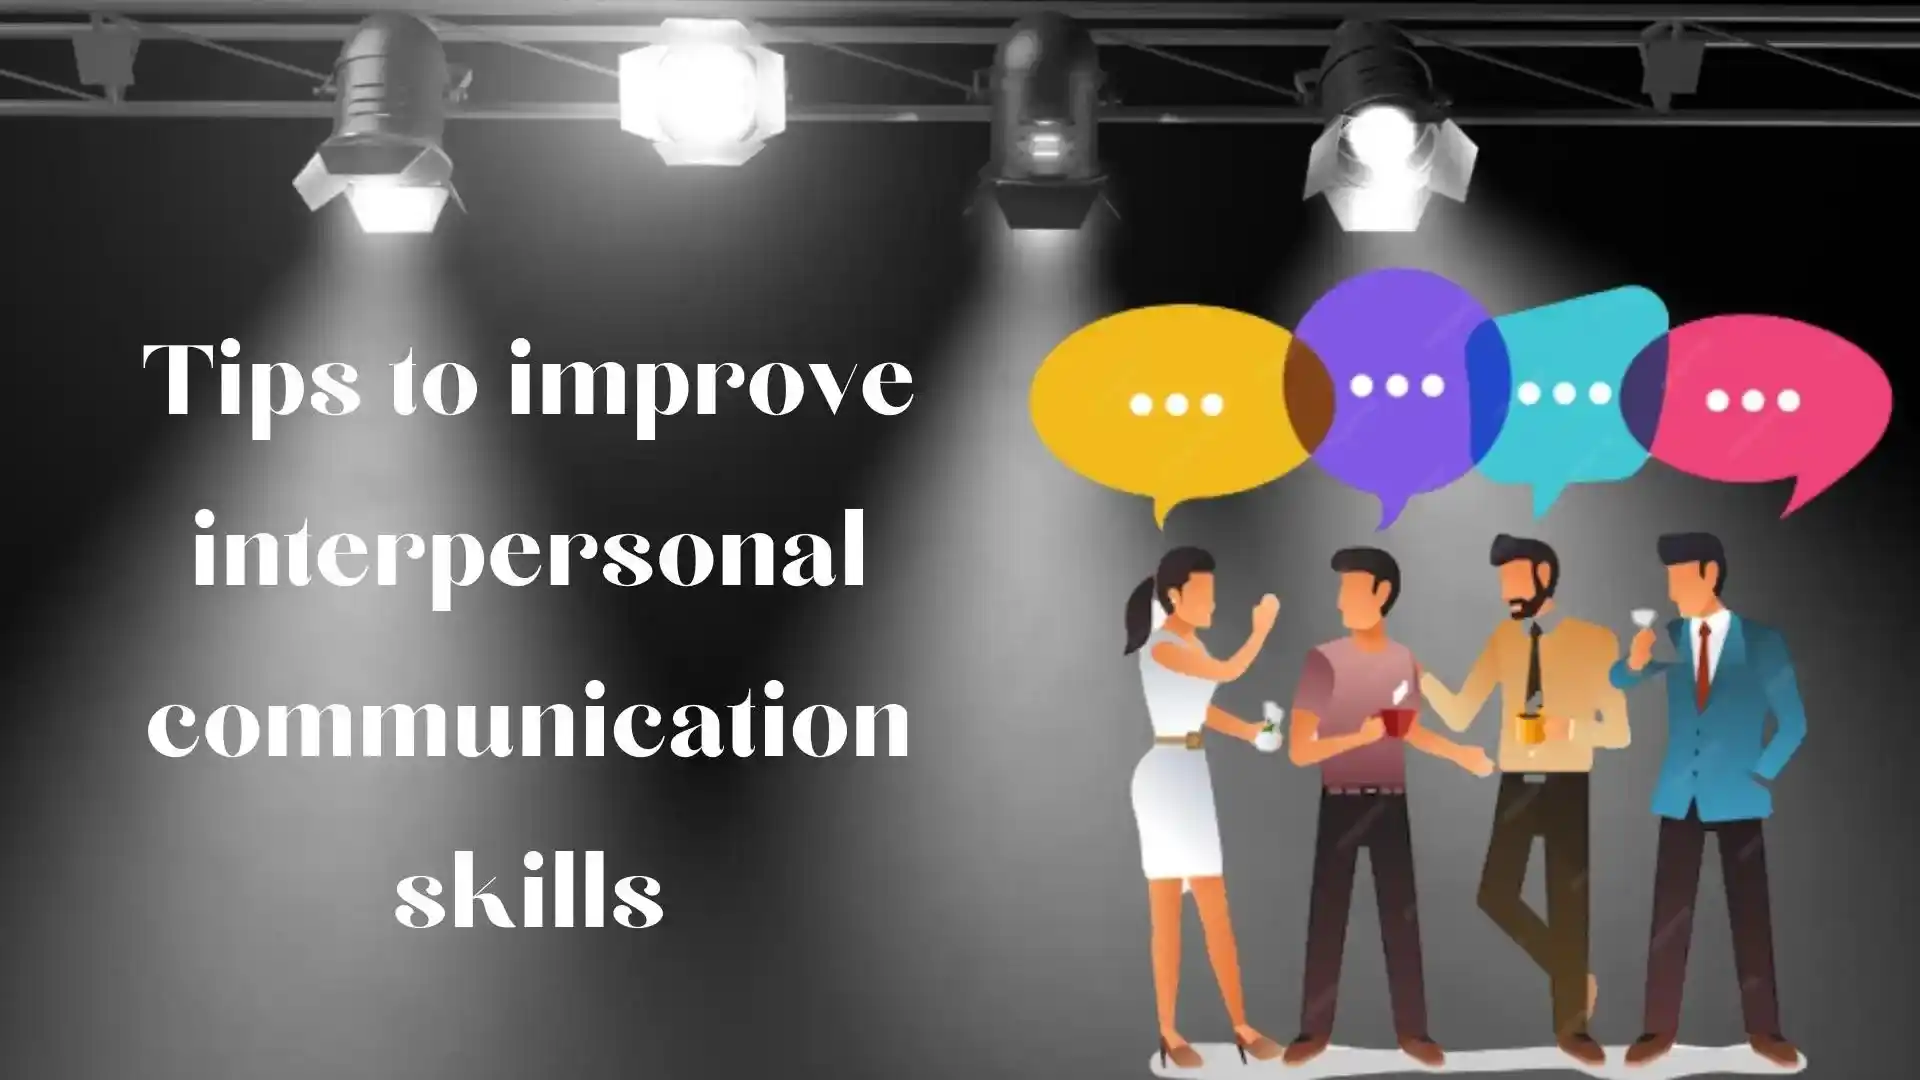  tips to improve interpersonal communication skills